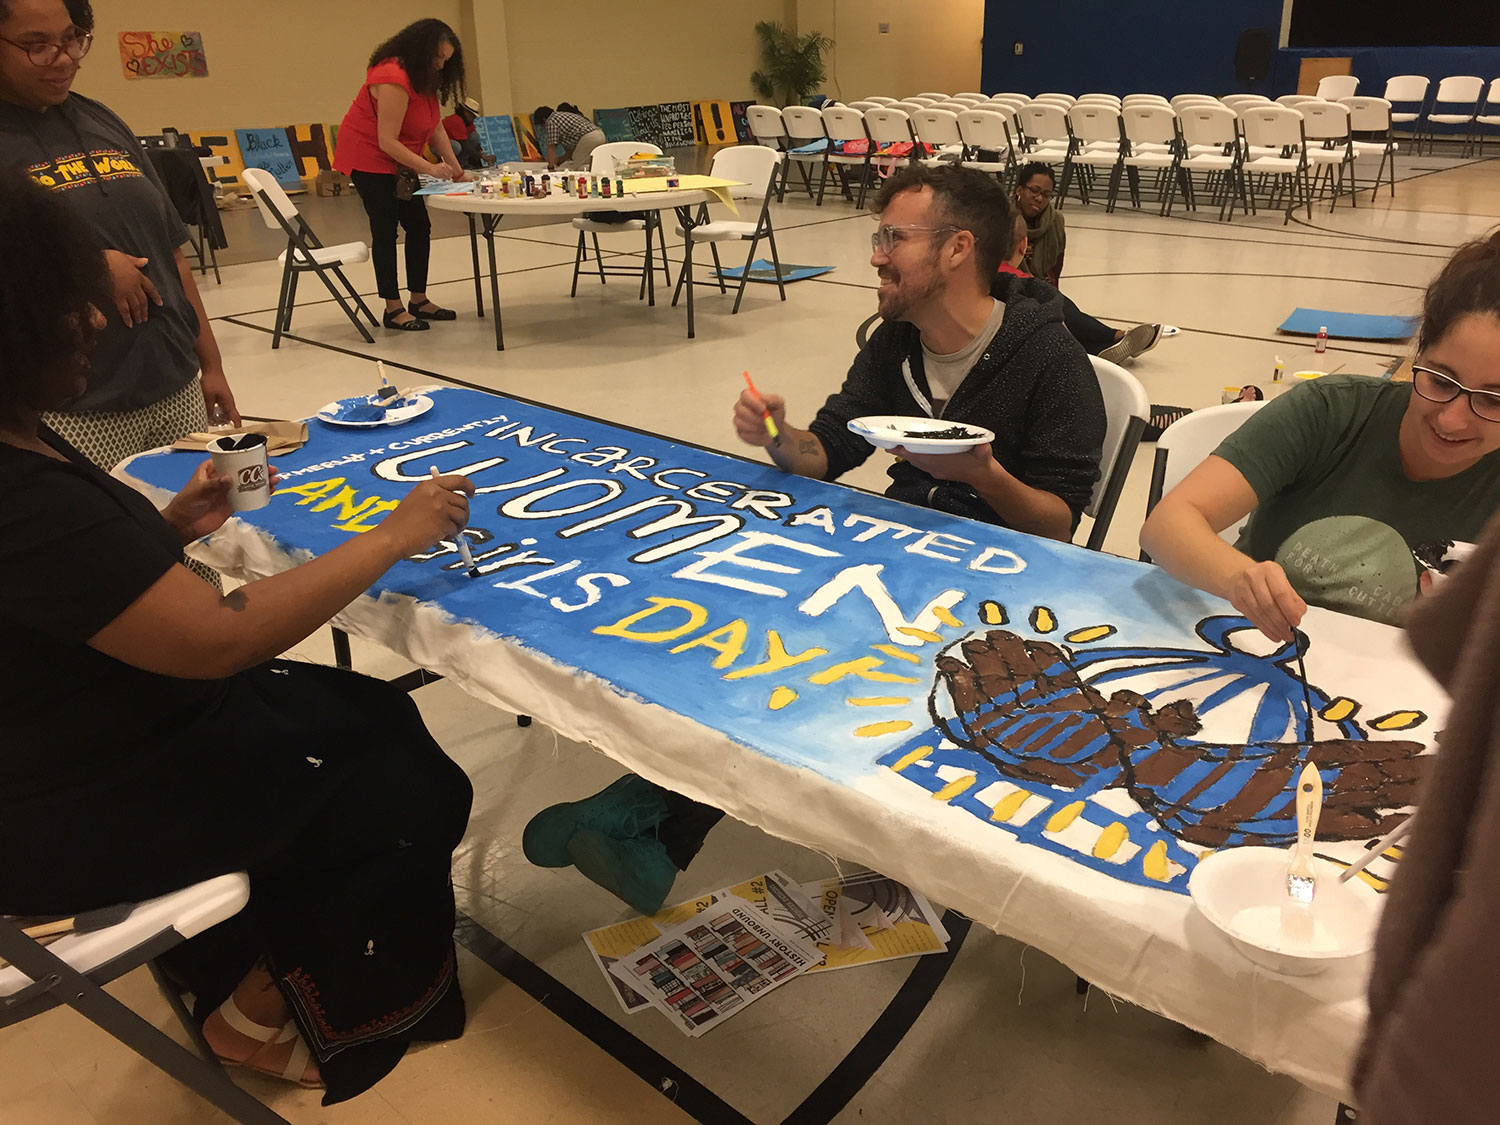 formerly-currently-incarcerated-women-girls-day-banner-painting.jpg